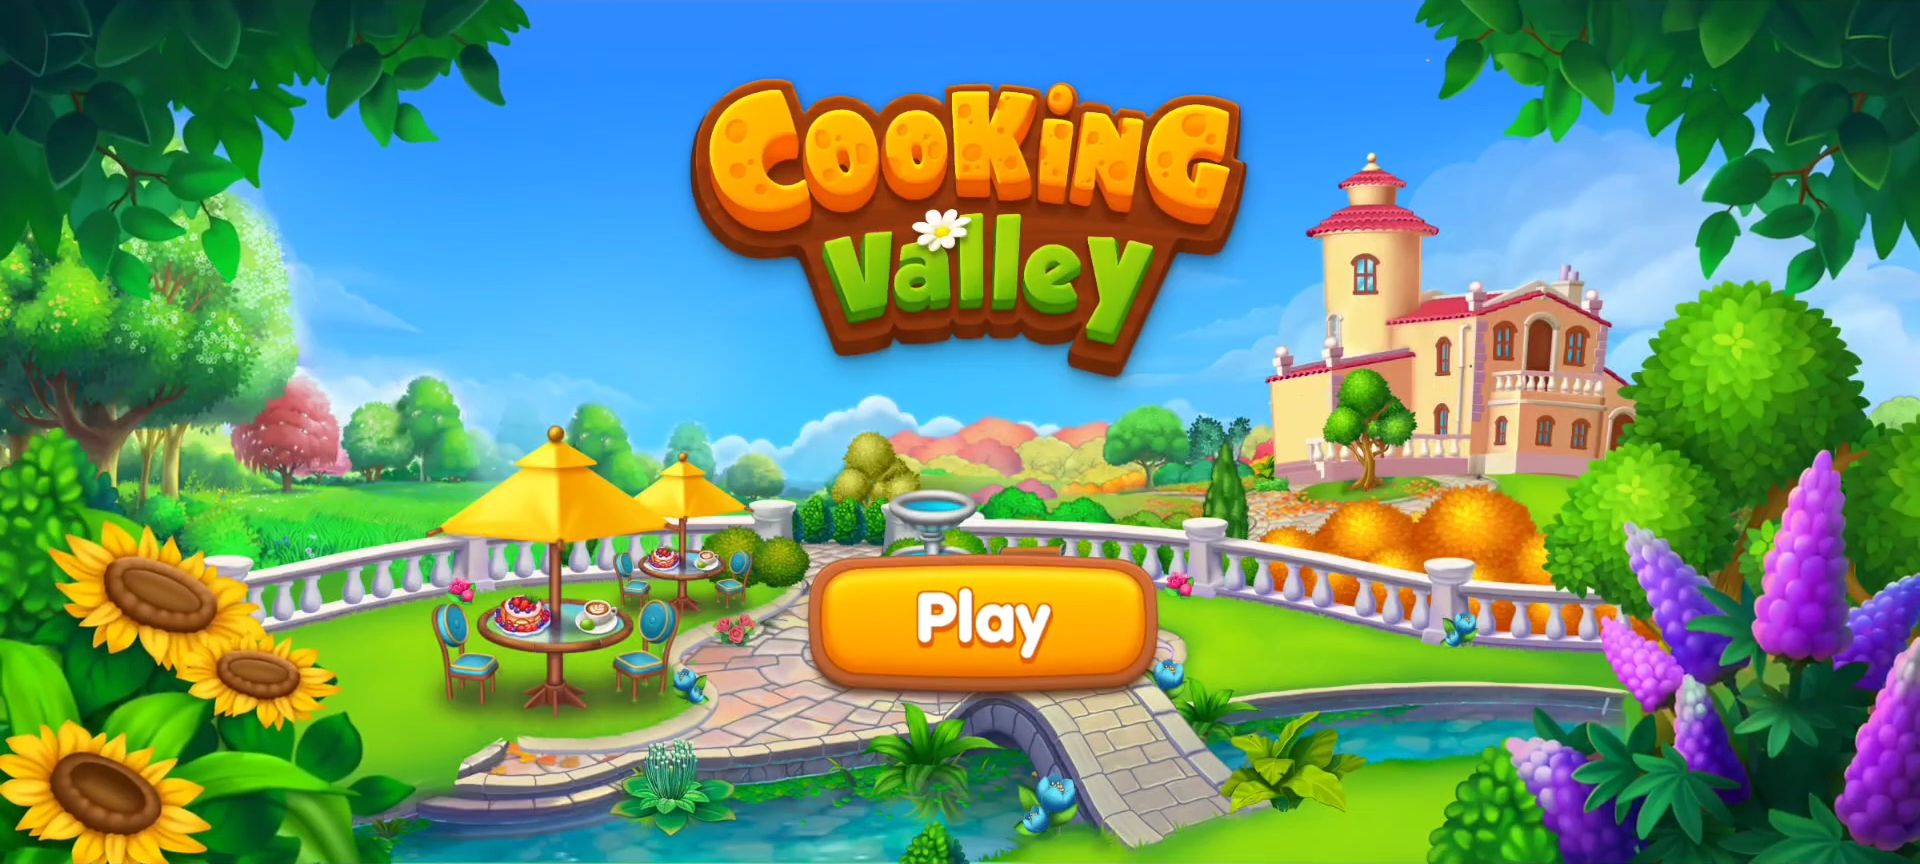 Full version of Android Cooking game apk Valley: Cooking Games & Design for tablet and phone.